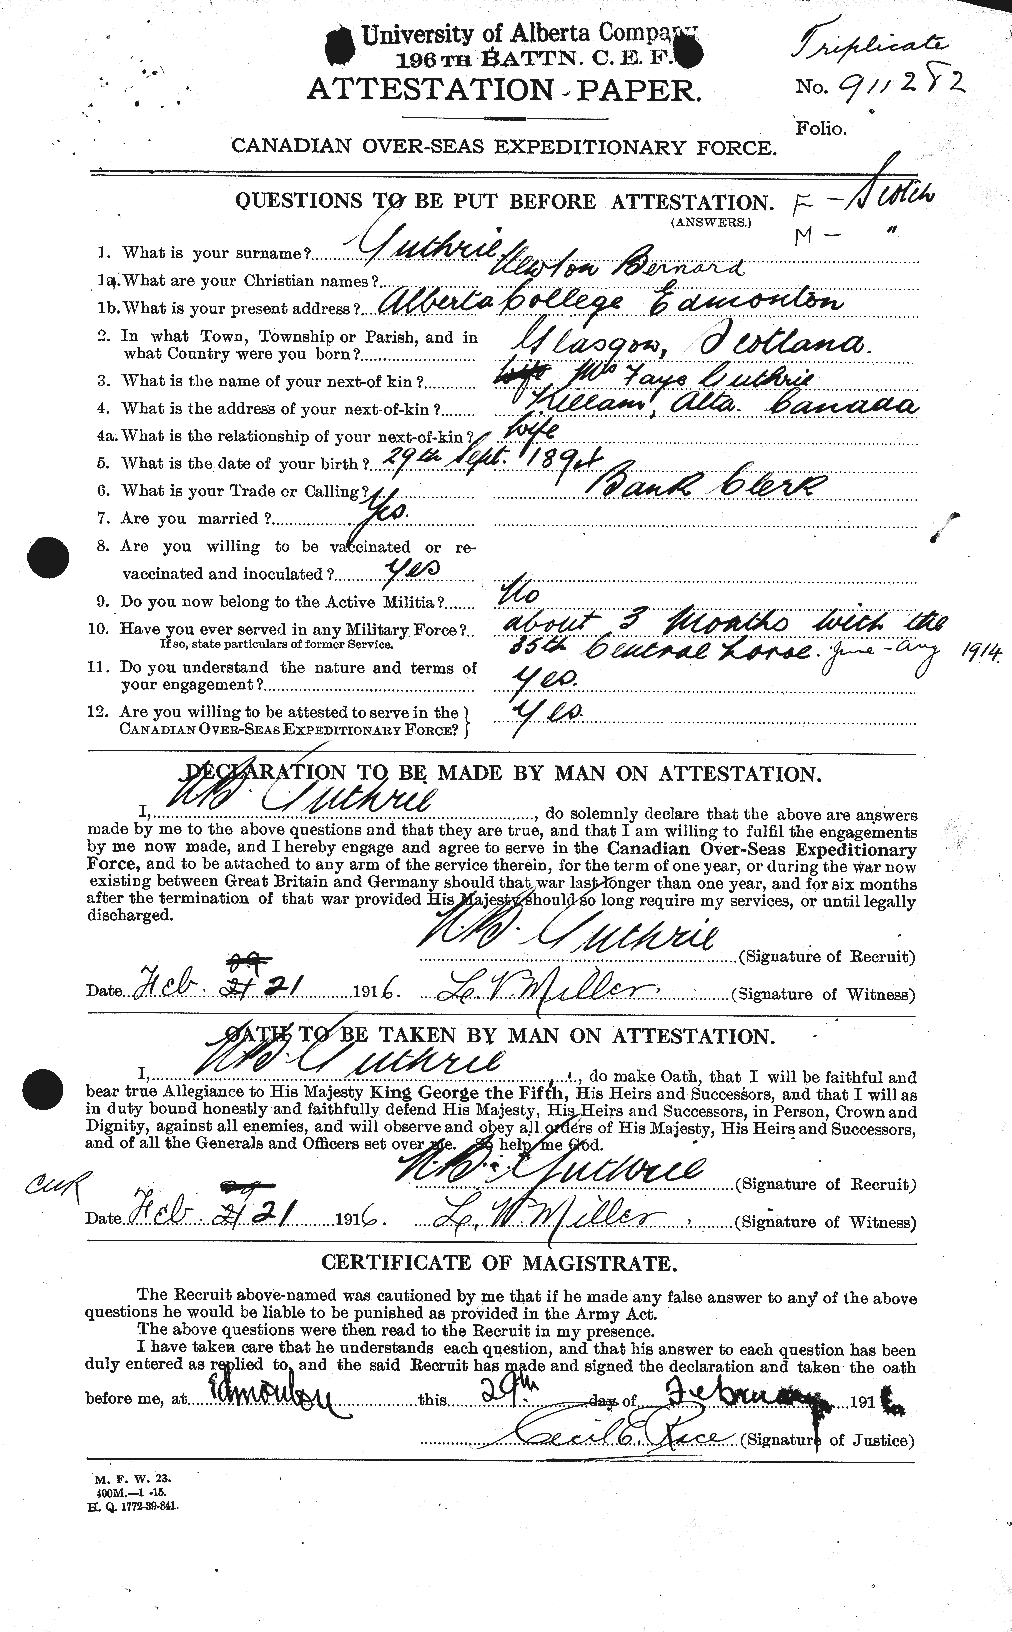 Personnel Records of the First World War - CEF 370095a